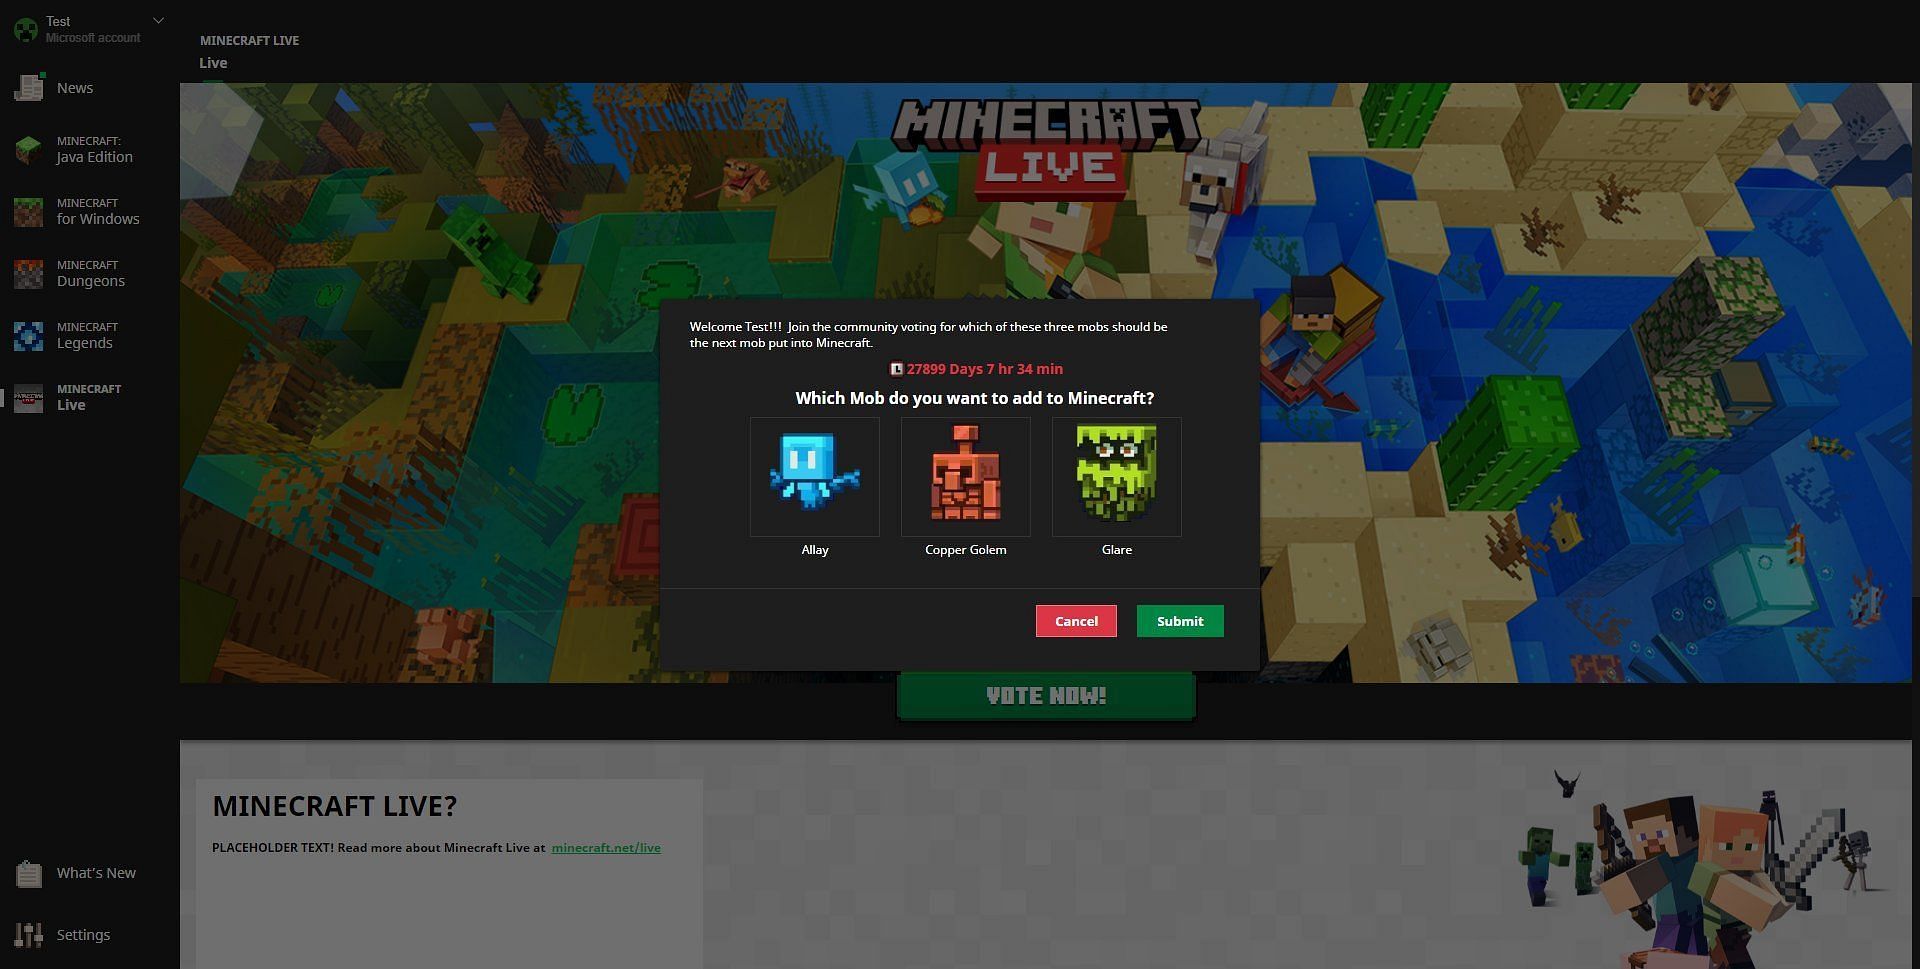 The official game launcher will feature a new Minecraft Live event section for mob votes (Image via Twitter/@RogerBadgerman)